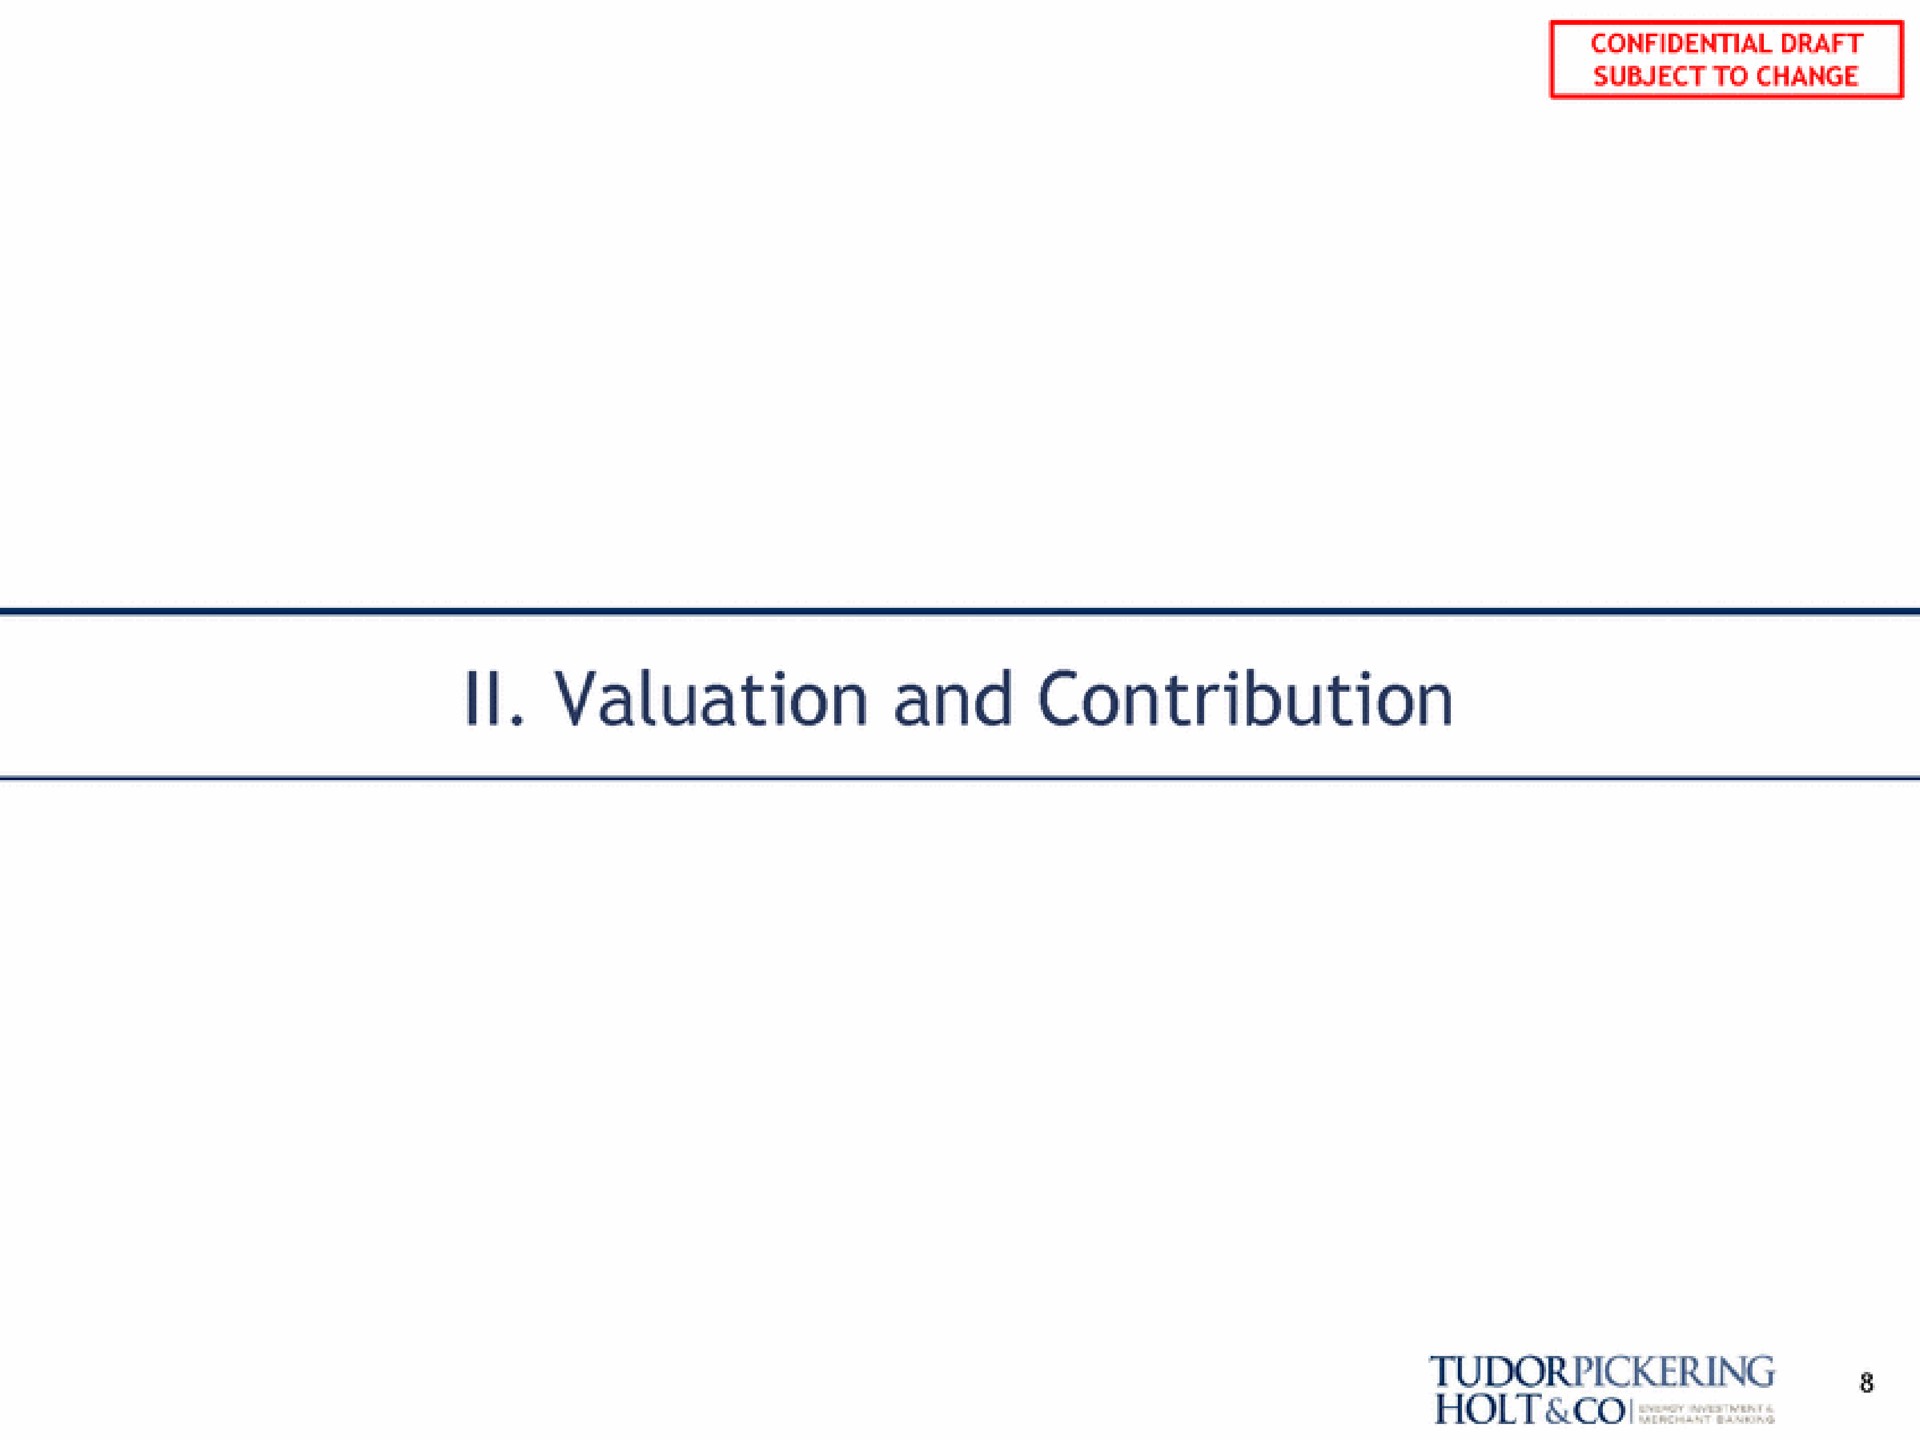 valuation and contribution | Tudor, Pickering, Holt & Co